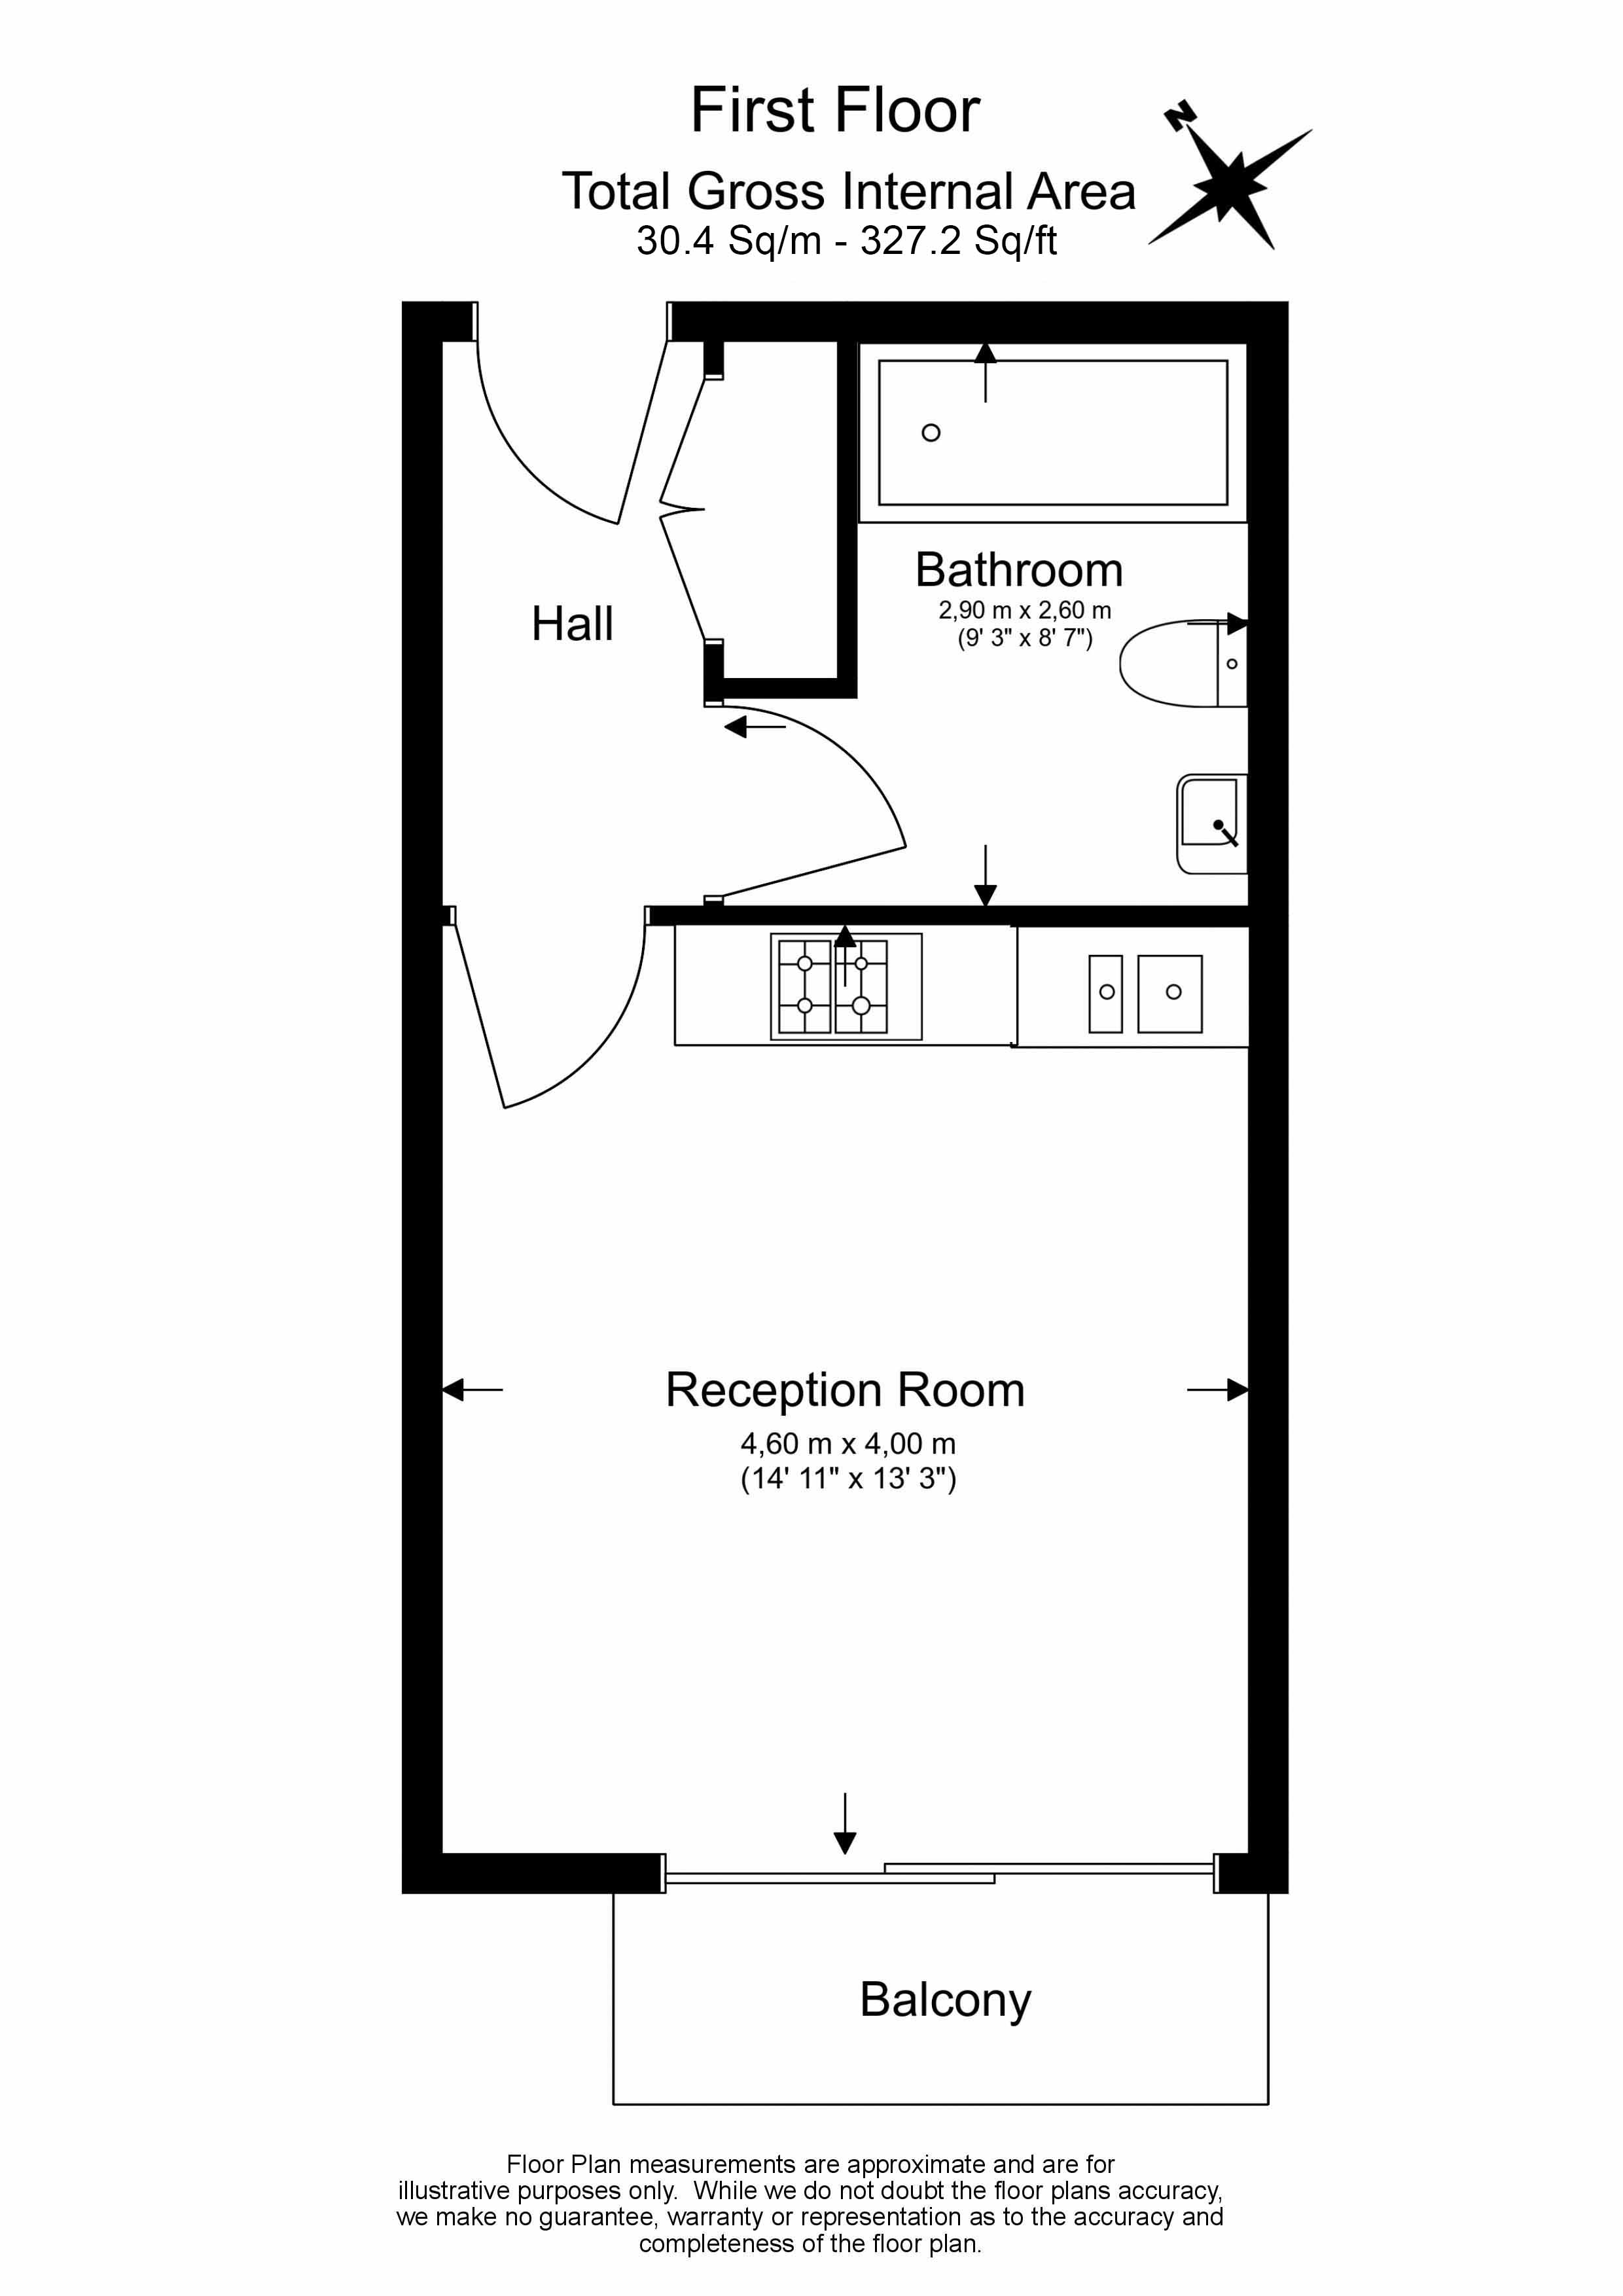 Studio apartments/flats to sale in Yeo Street, Bromley-By- Bow, London-Floorplan